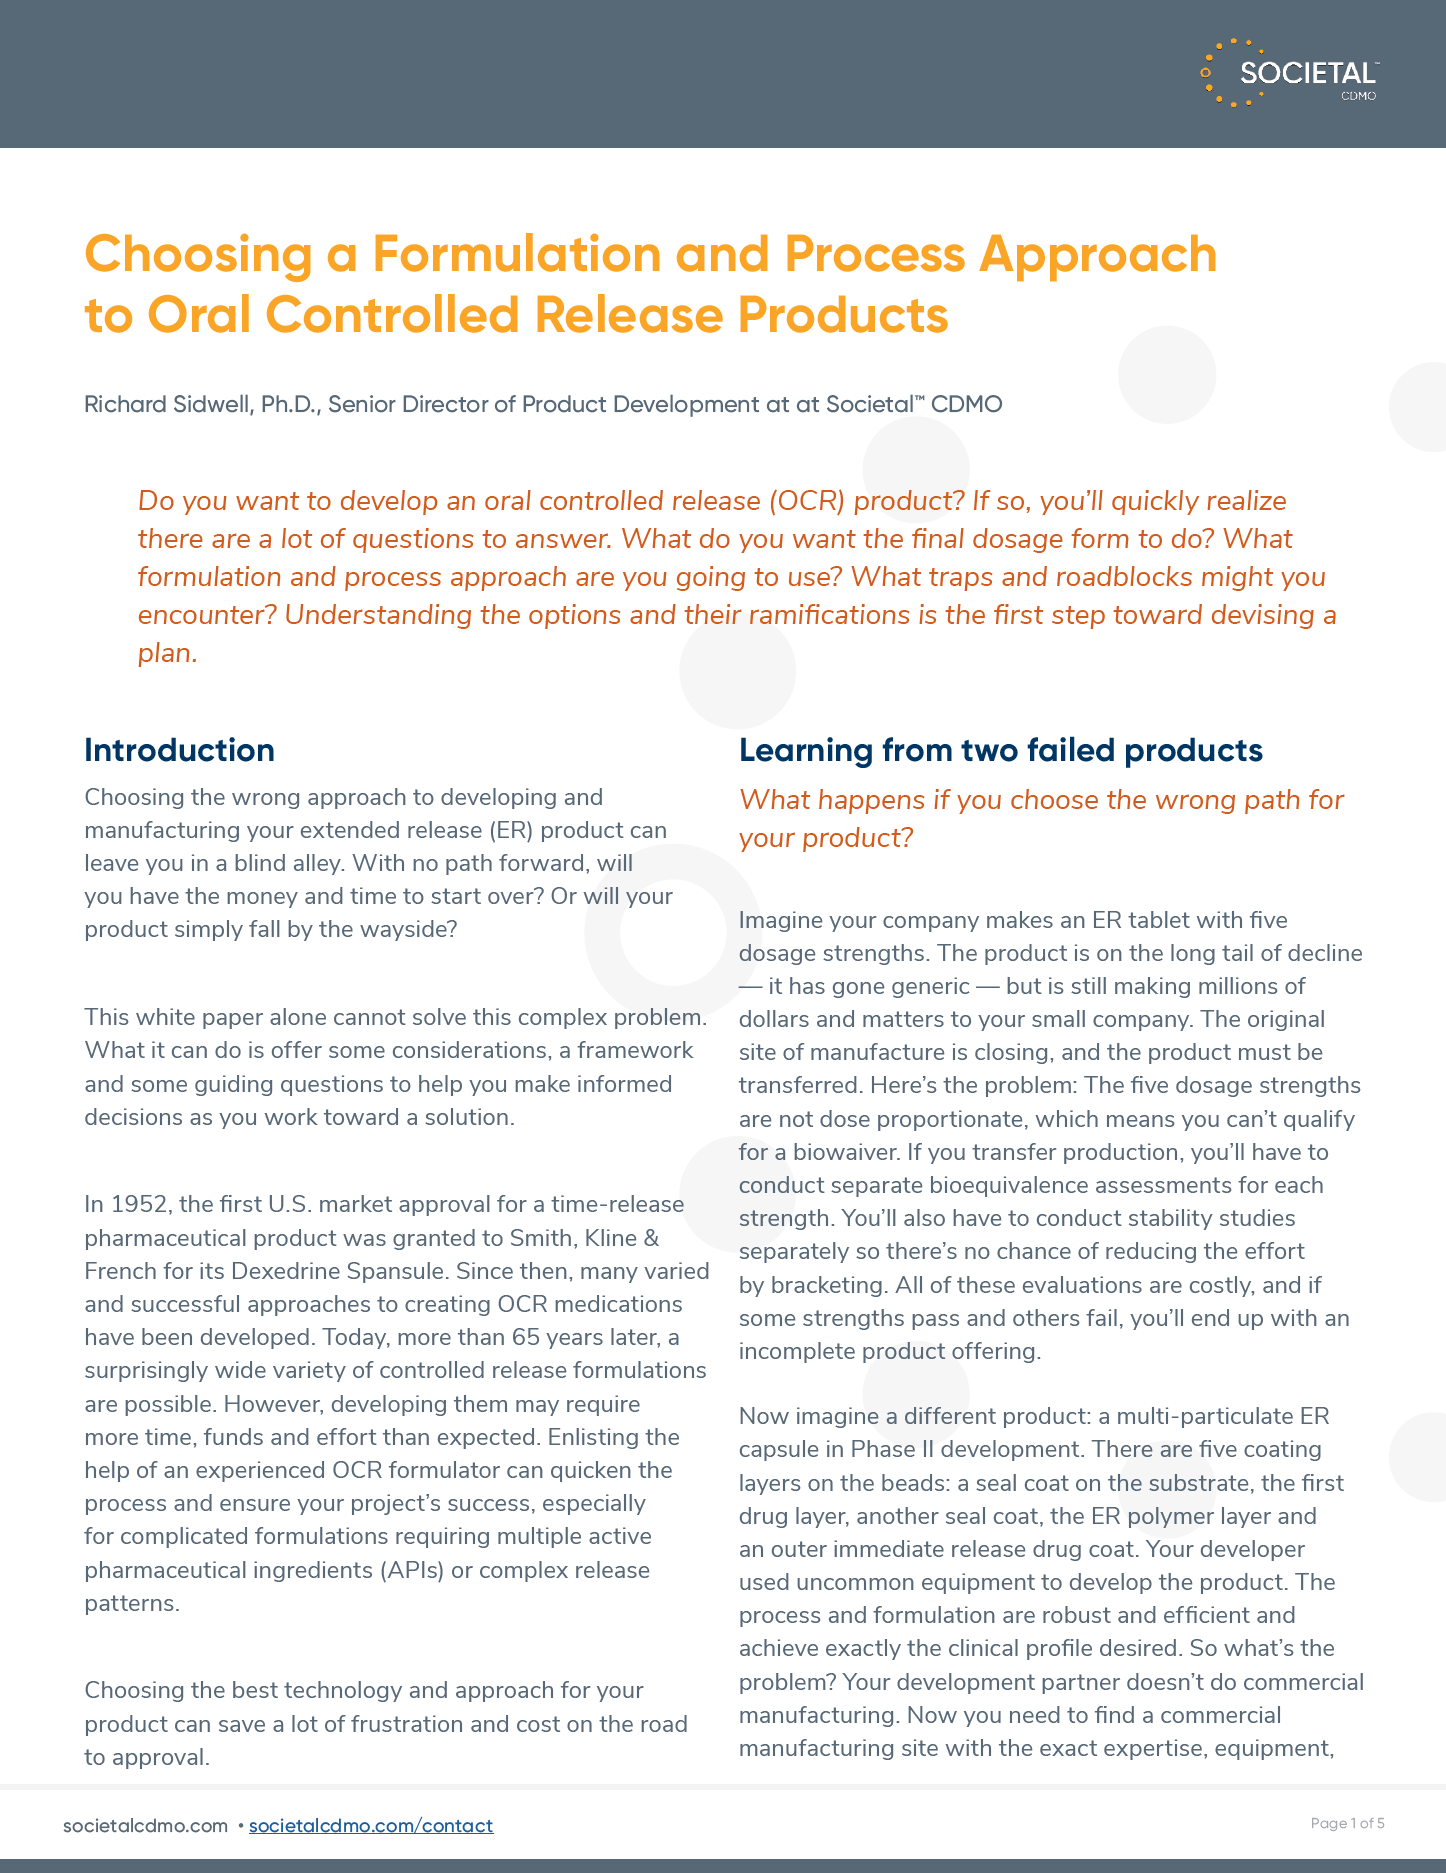 Choosing a Formulation and Process Approach White Paper